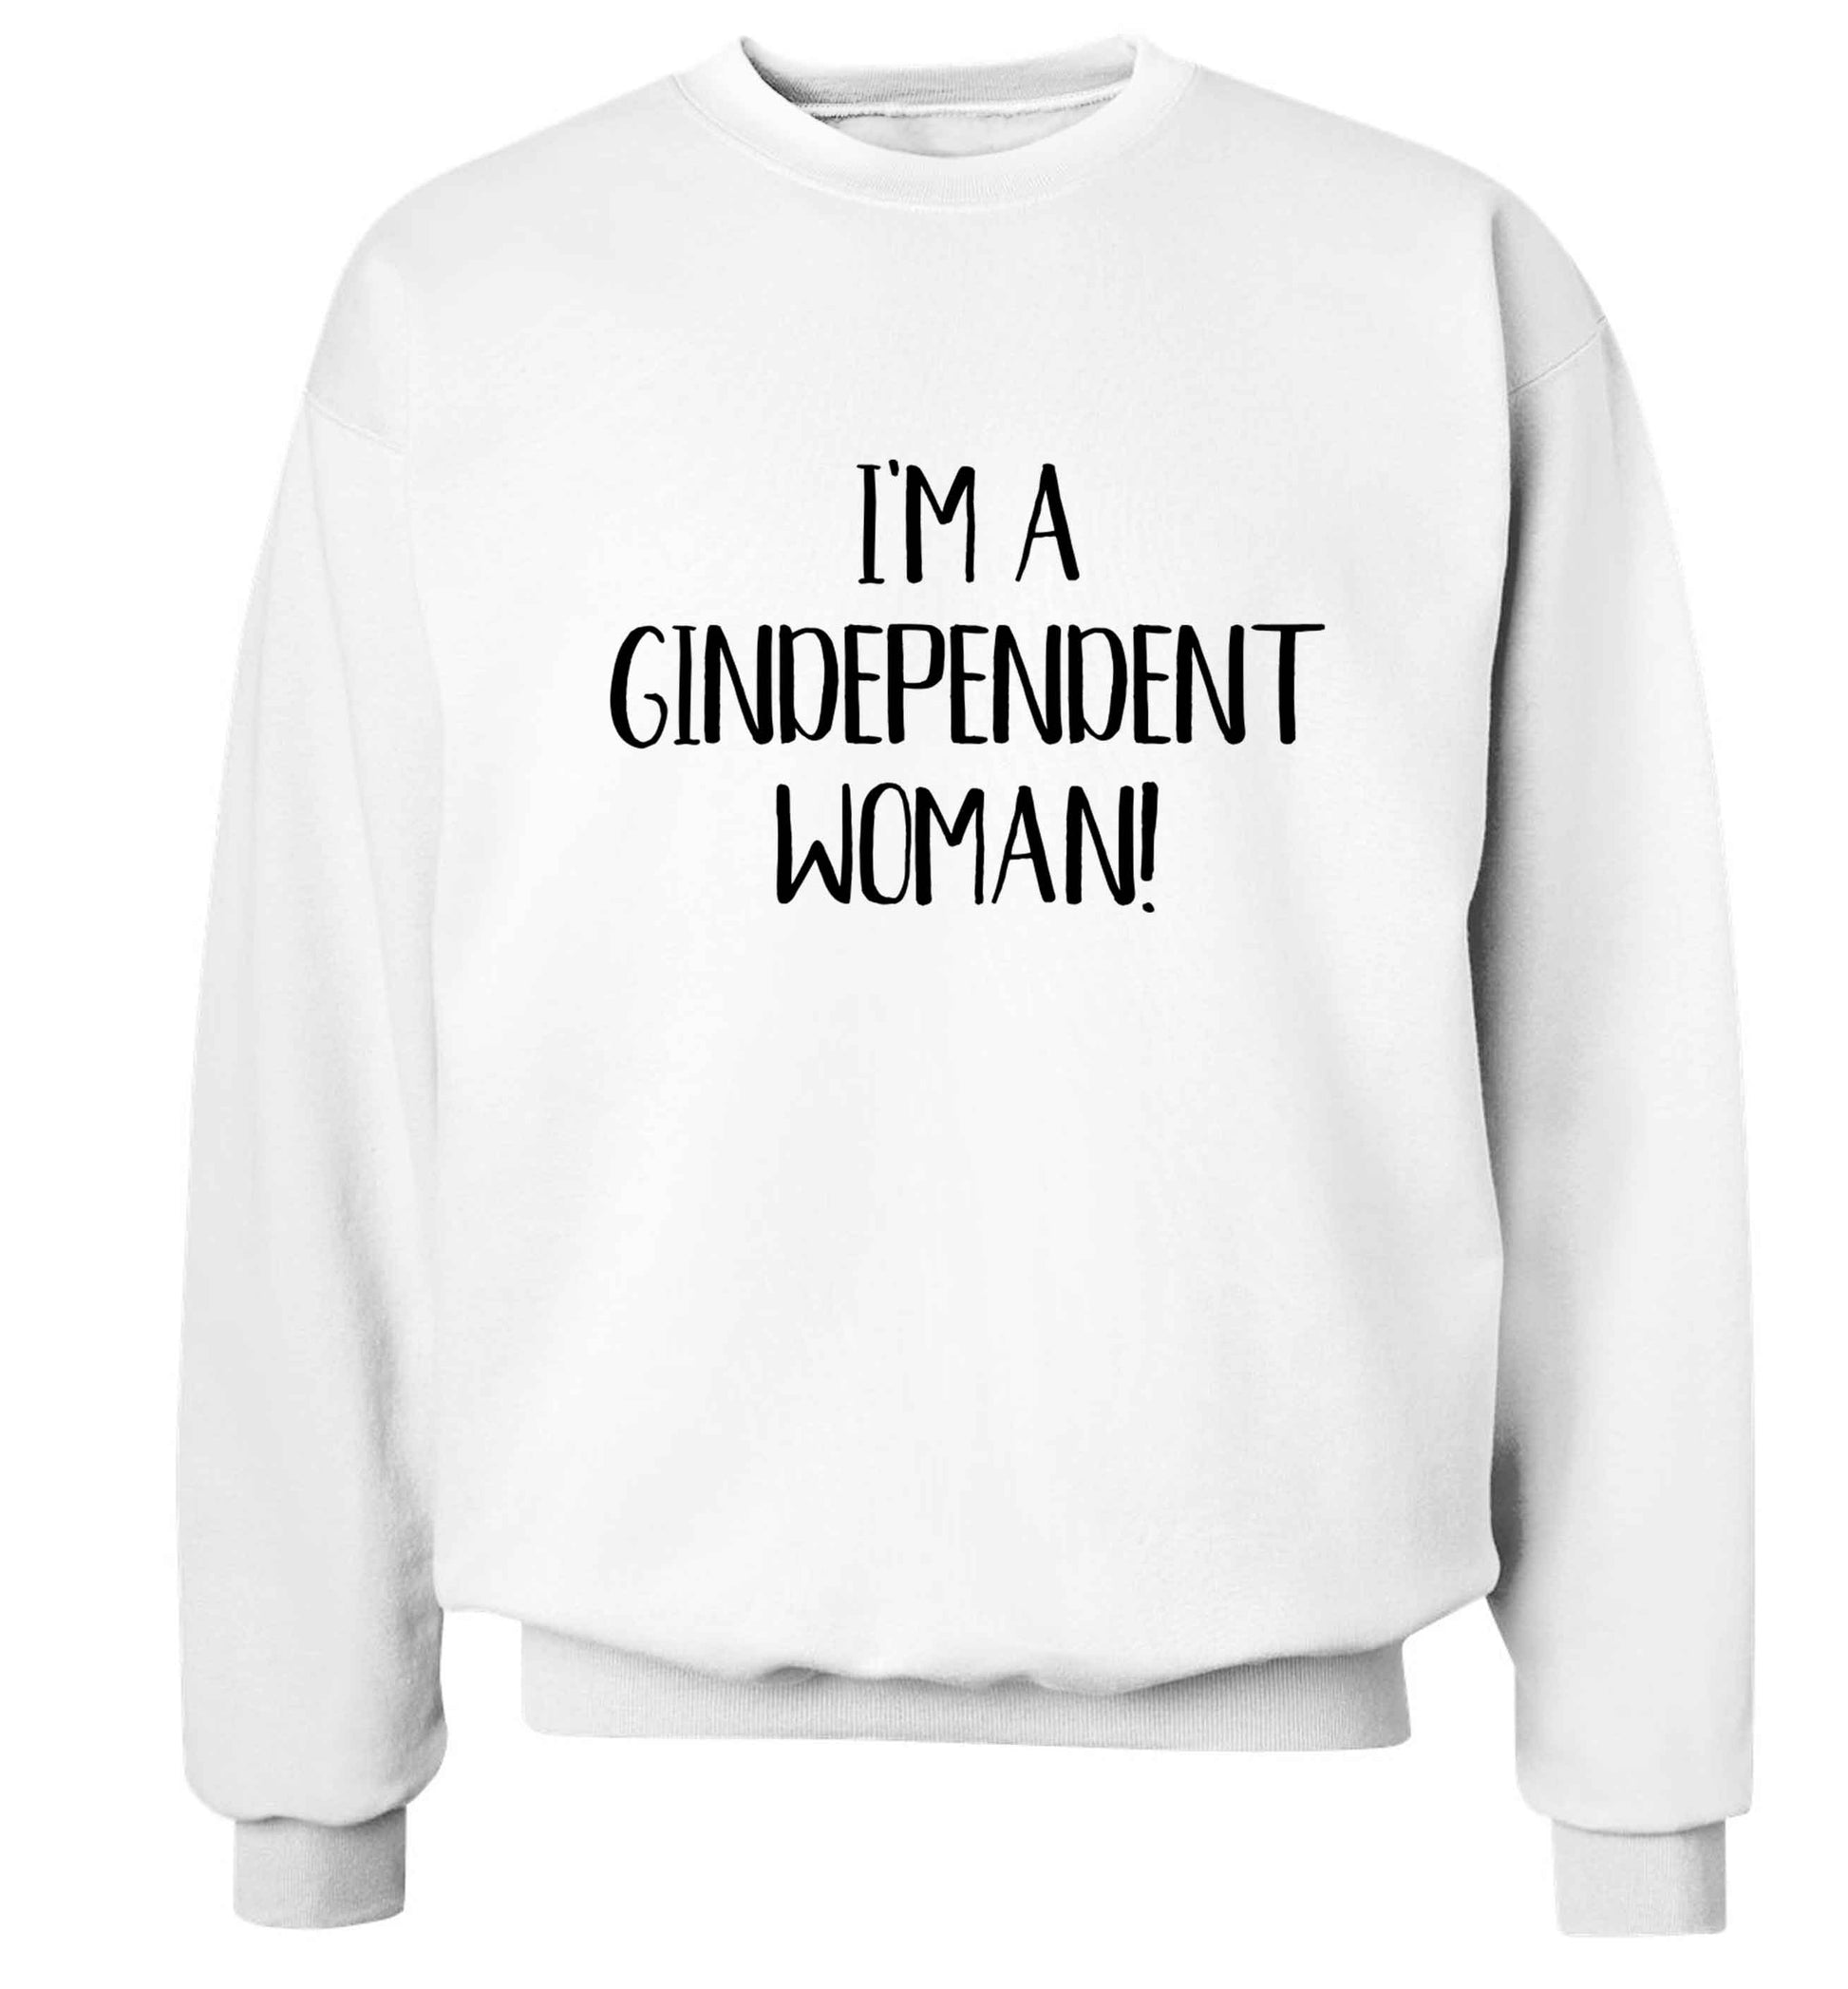 I'm a gindependent woman Adult's unisex white Sweater 2XL